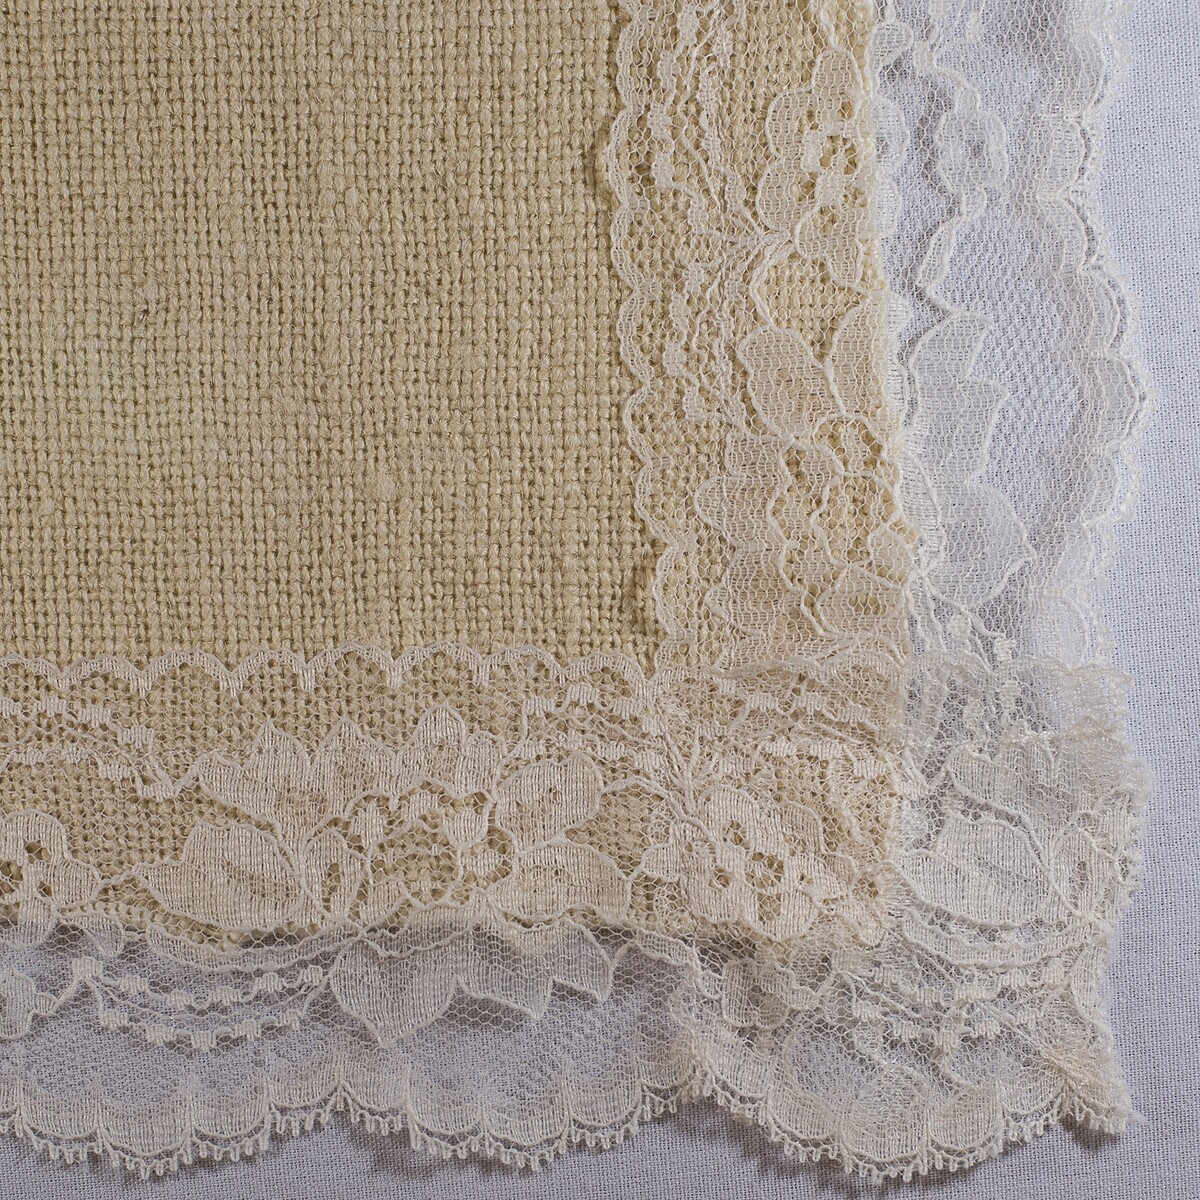 Ivory Burlap with Lace